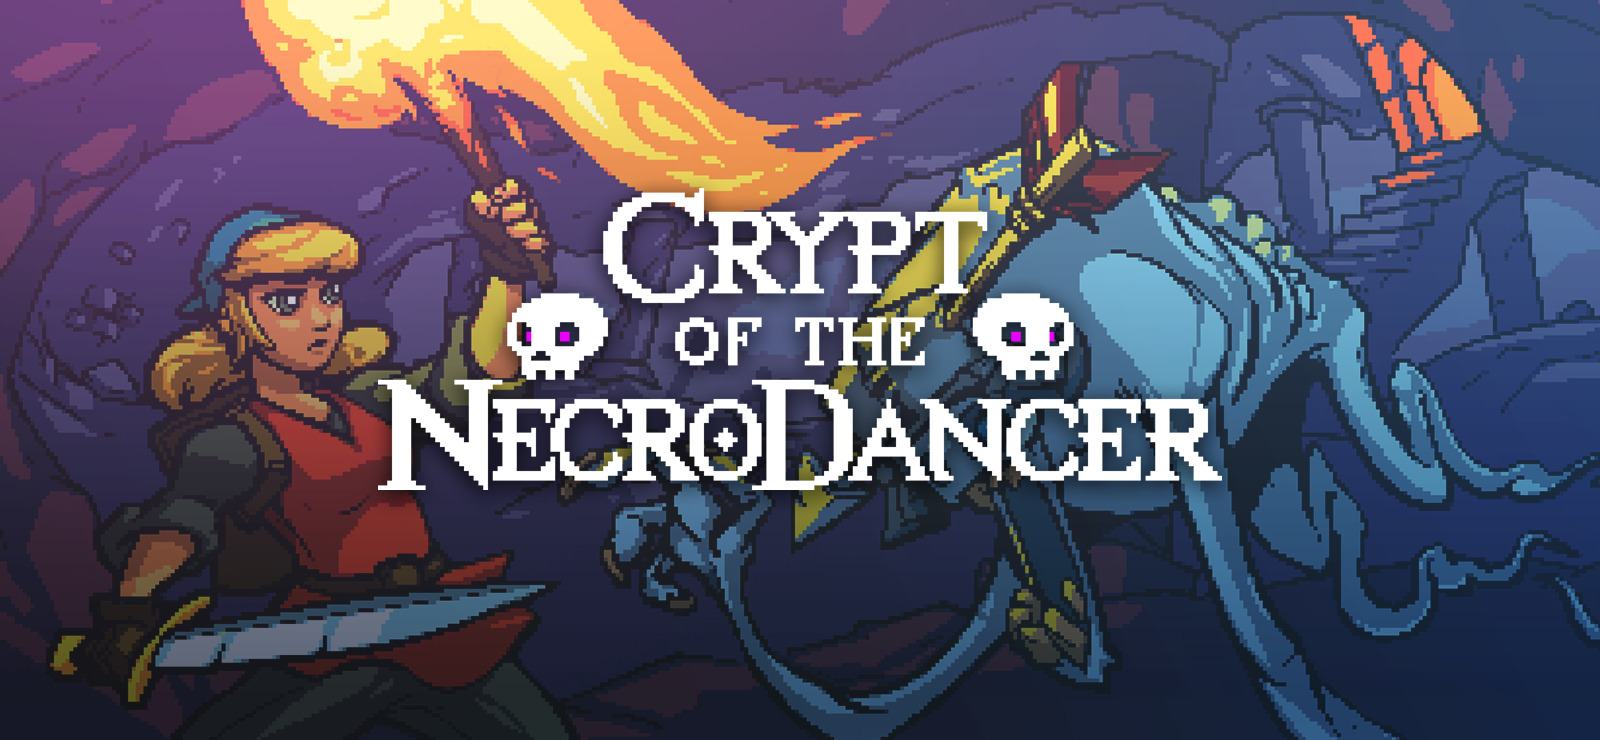 download crypt of the necrodancer cadence for free